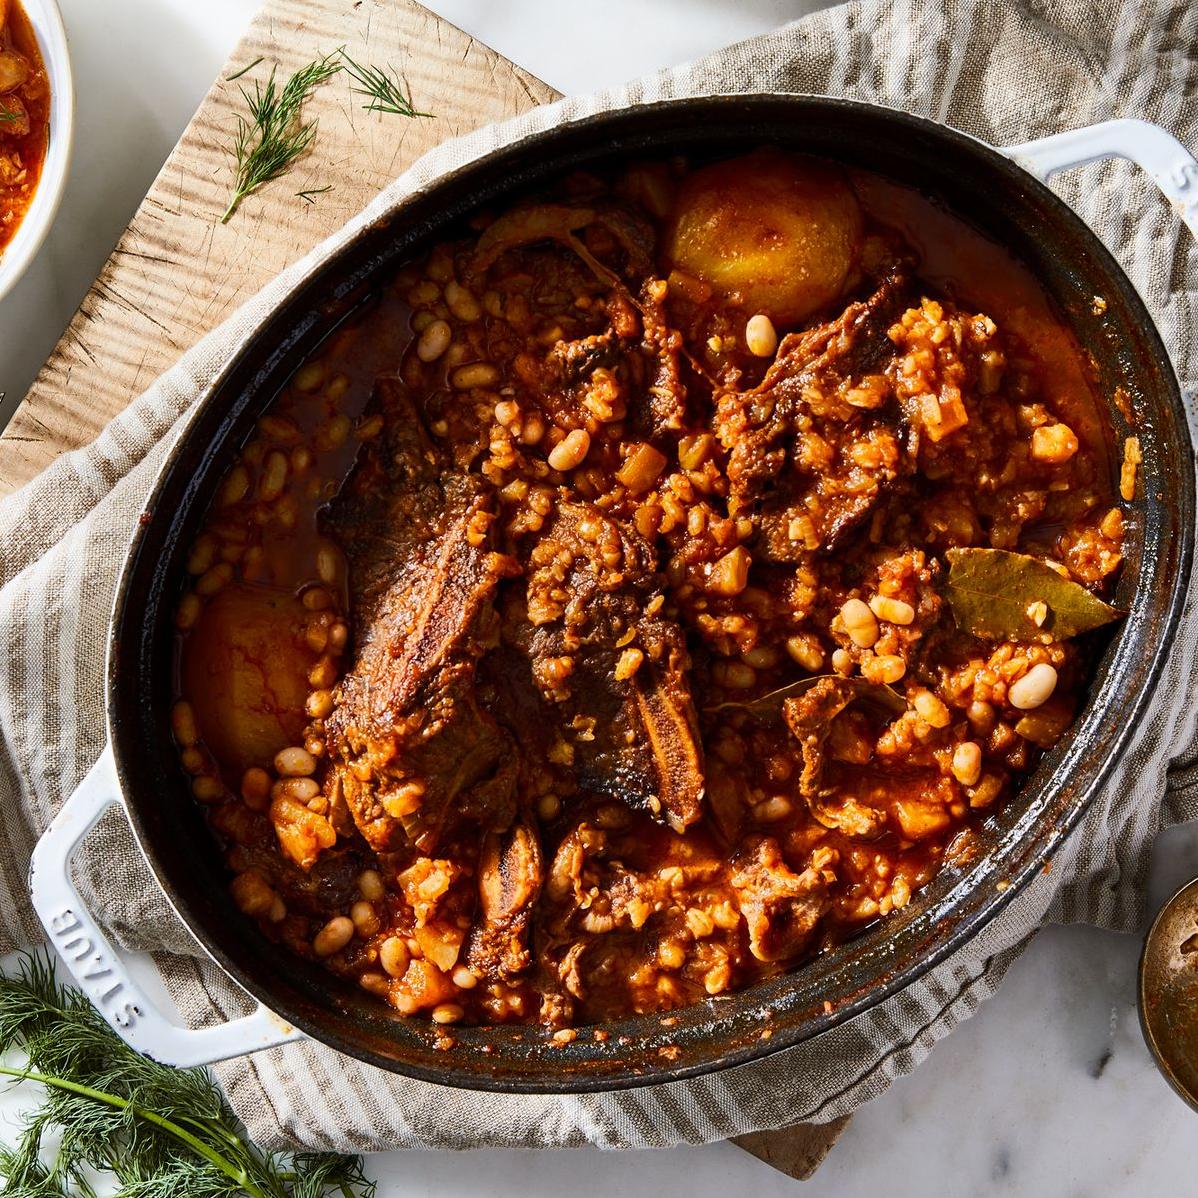  Layer upon layer of flavor in every spoonful of this traditional Jewish dish.